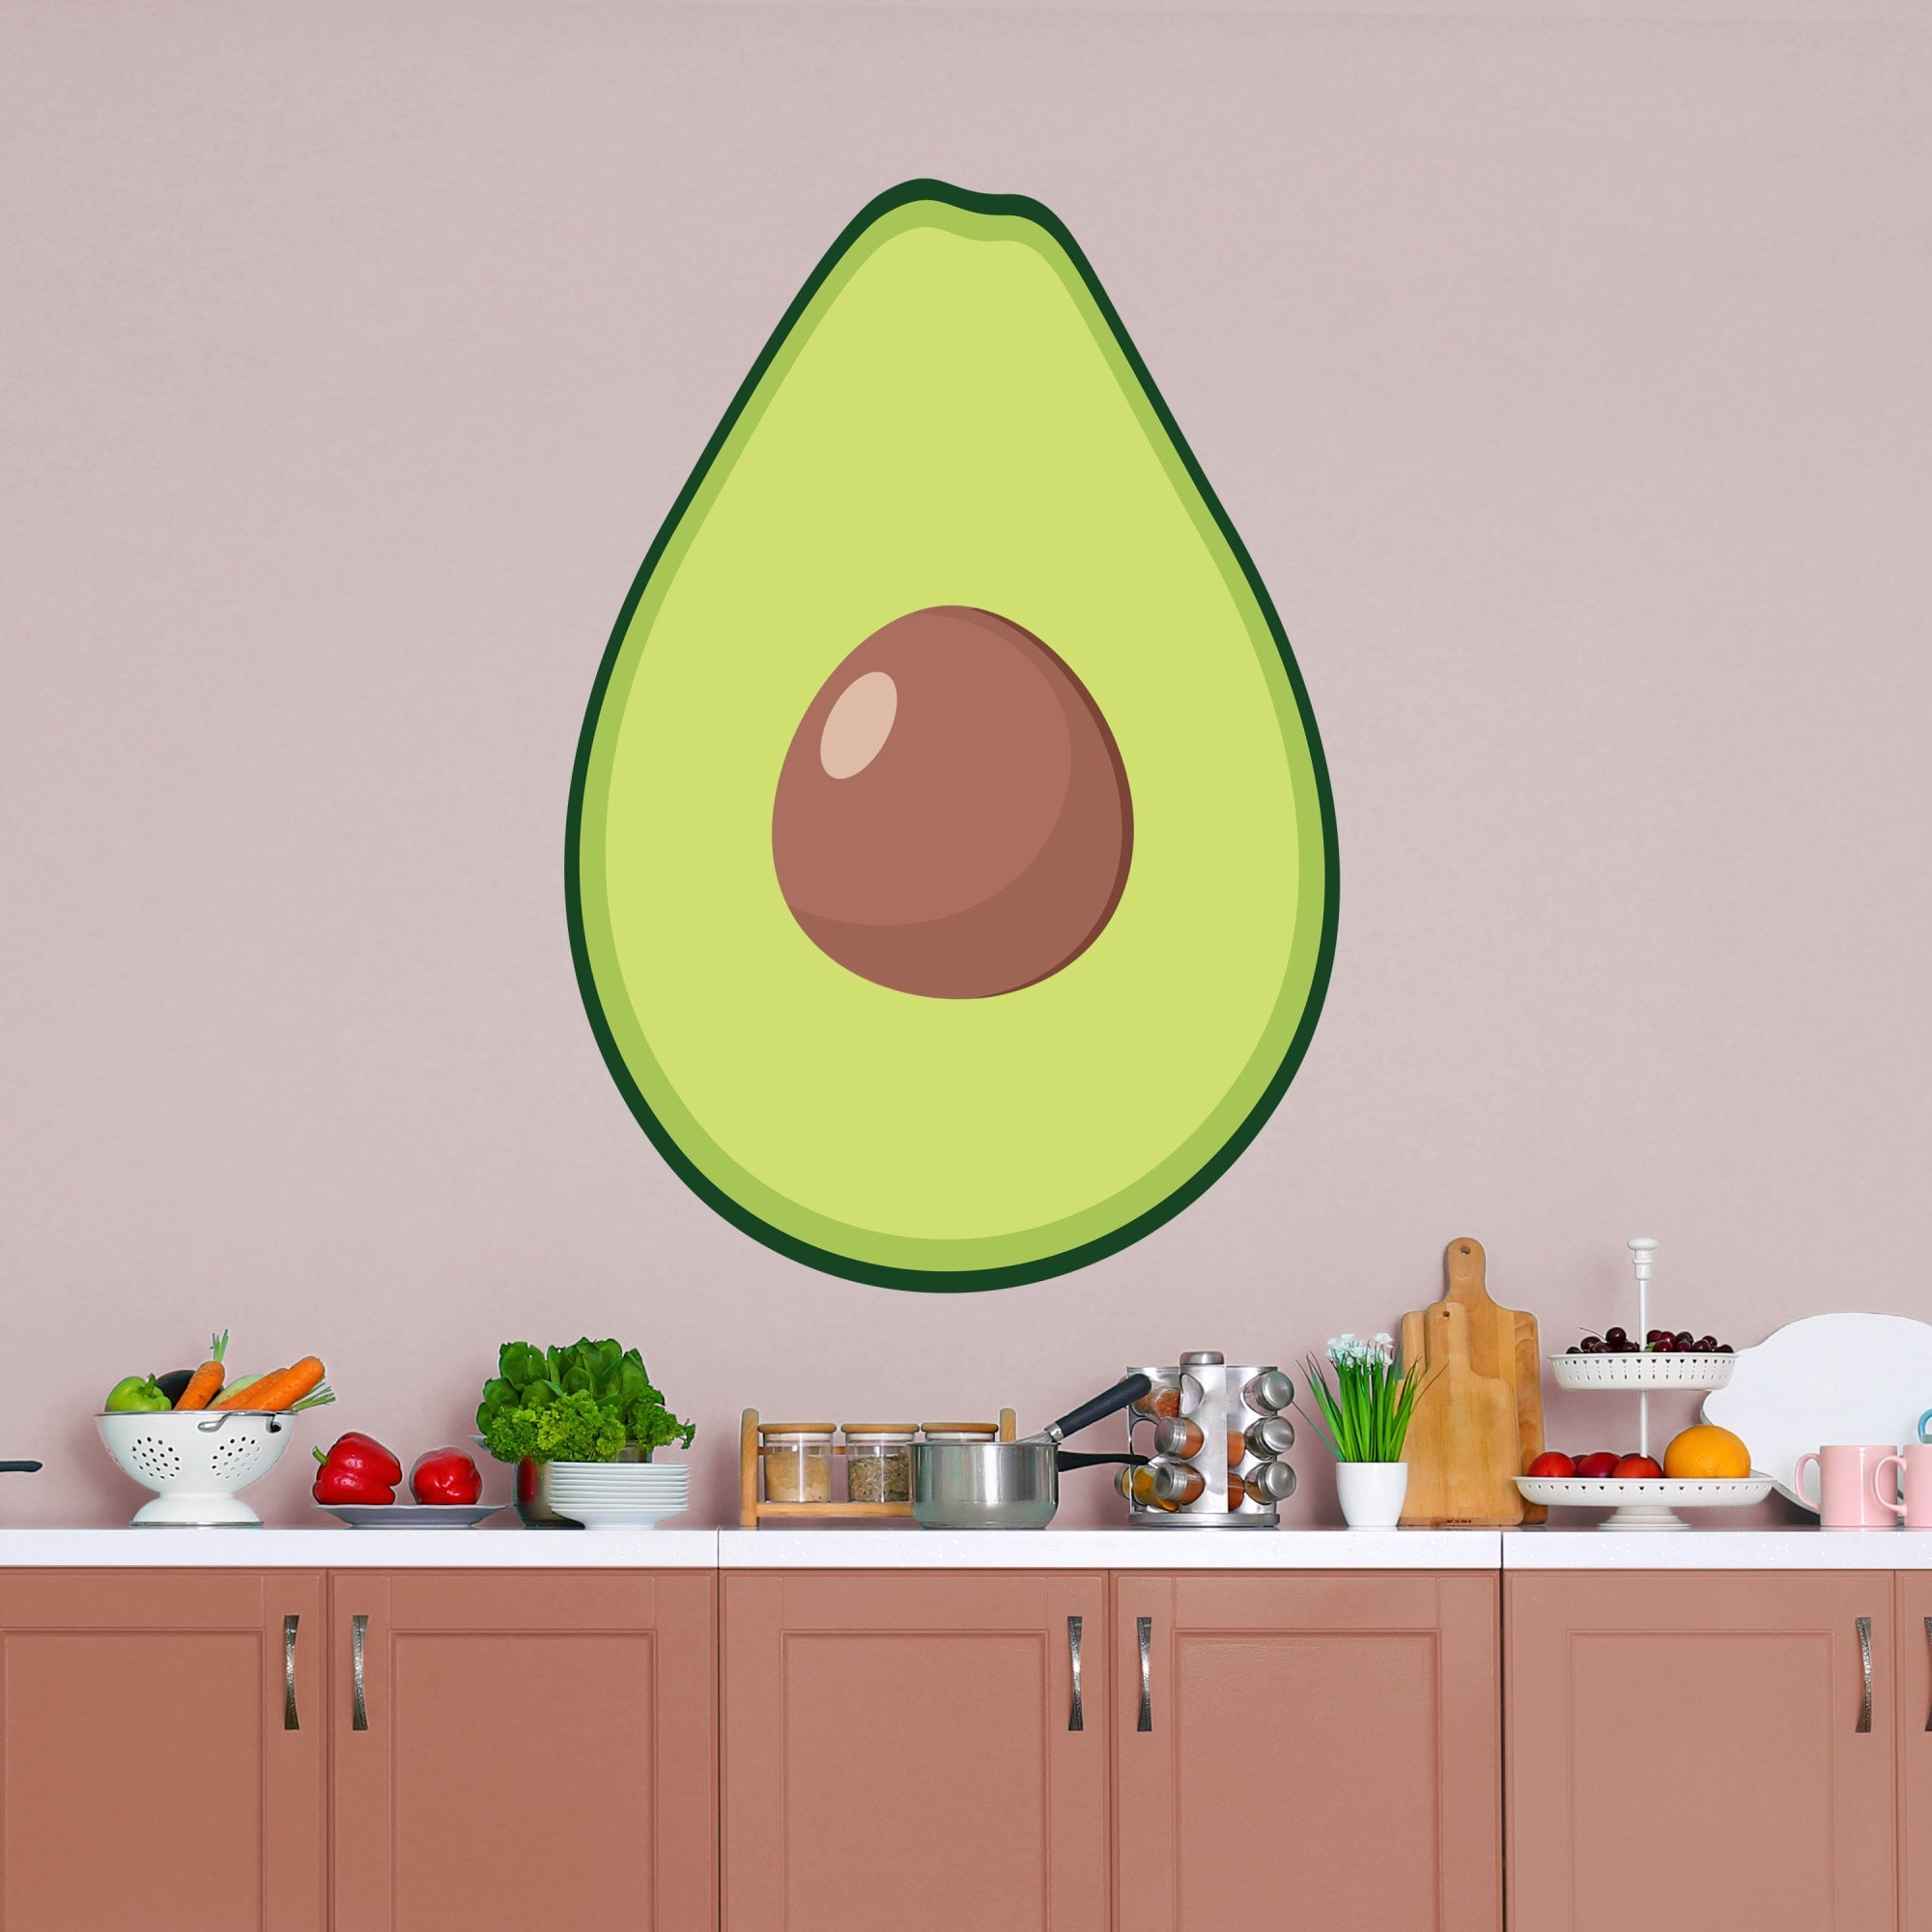 Avocado: Illustrated - Removable Vinyl Decal Giant Avocado + 2 Decals (33"W x 48"H) by Fathead